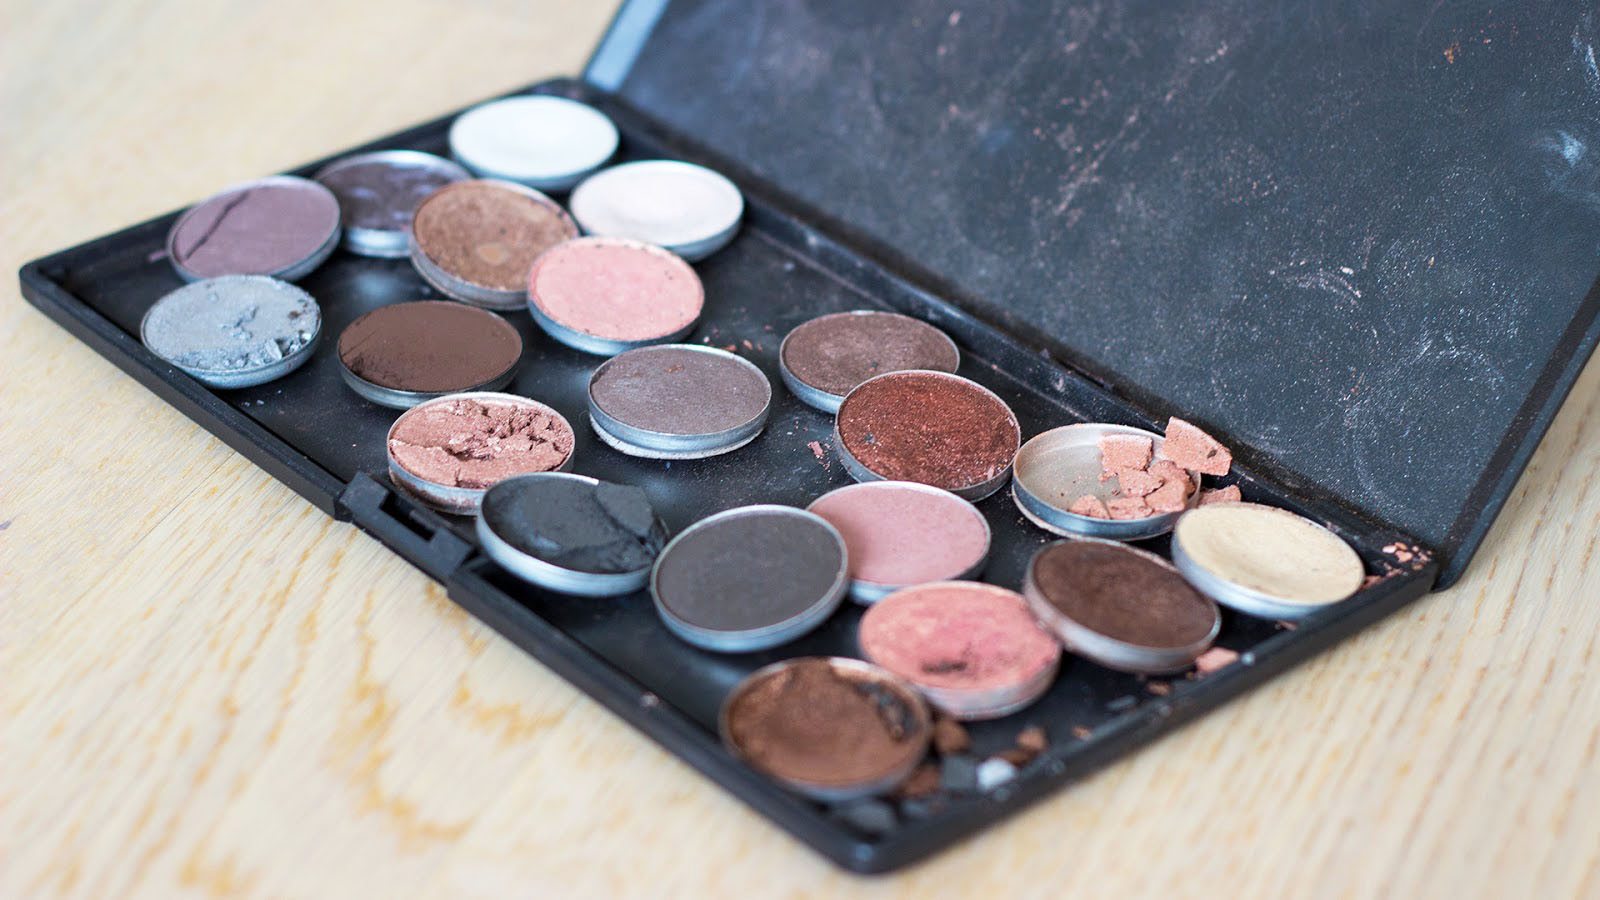 8 Awesome Tips Every Beauty Junkie Needs To Know!